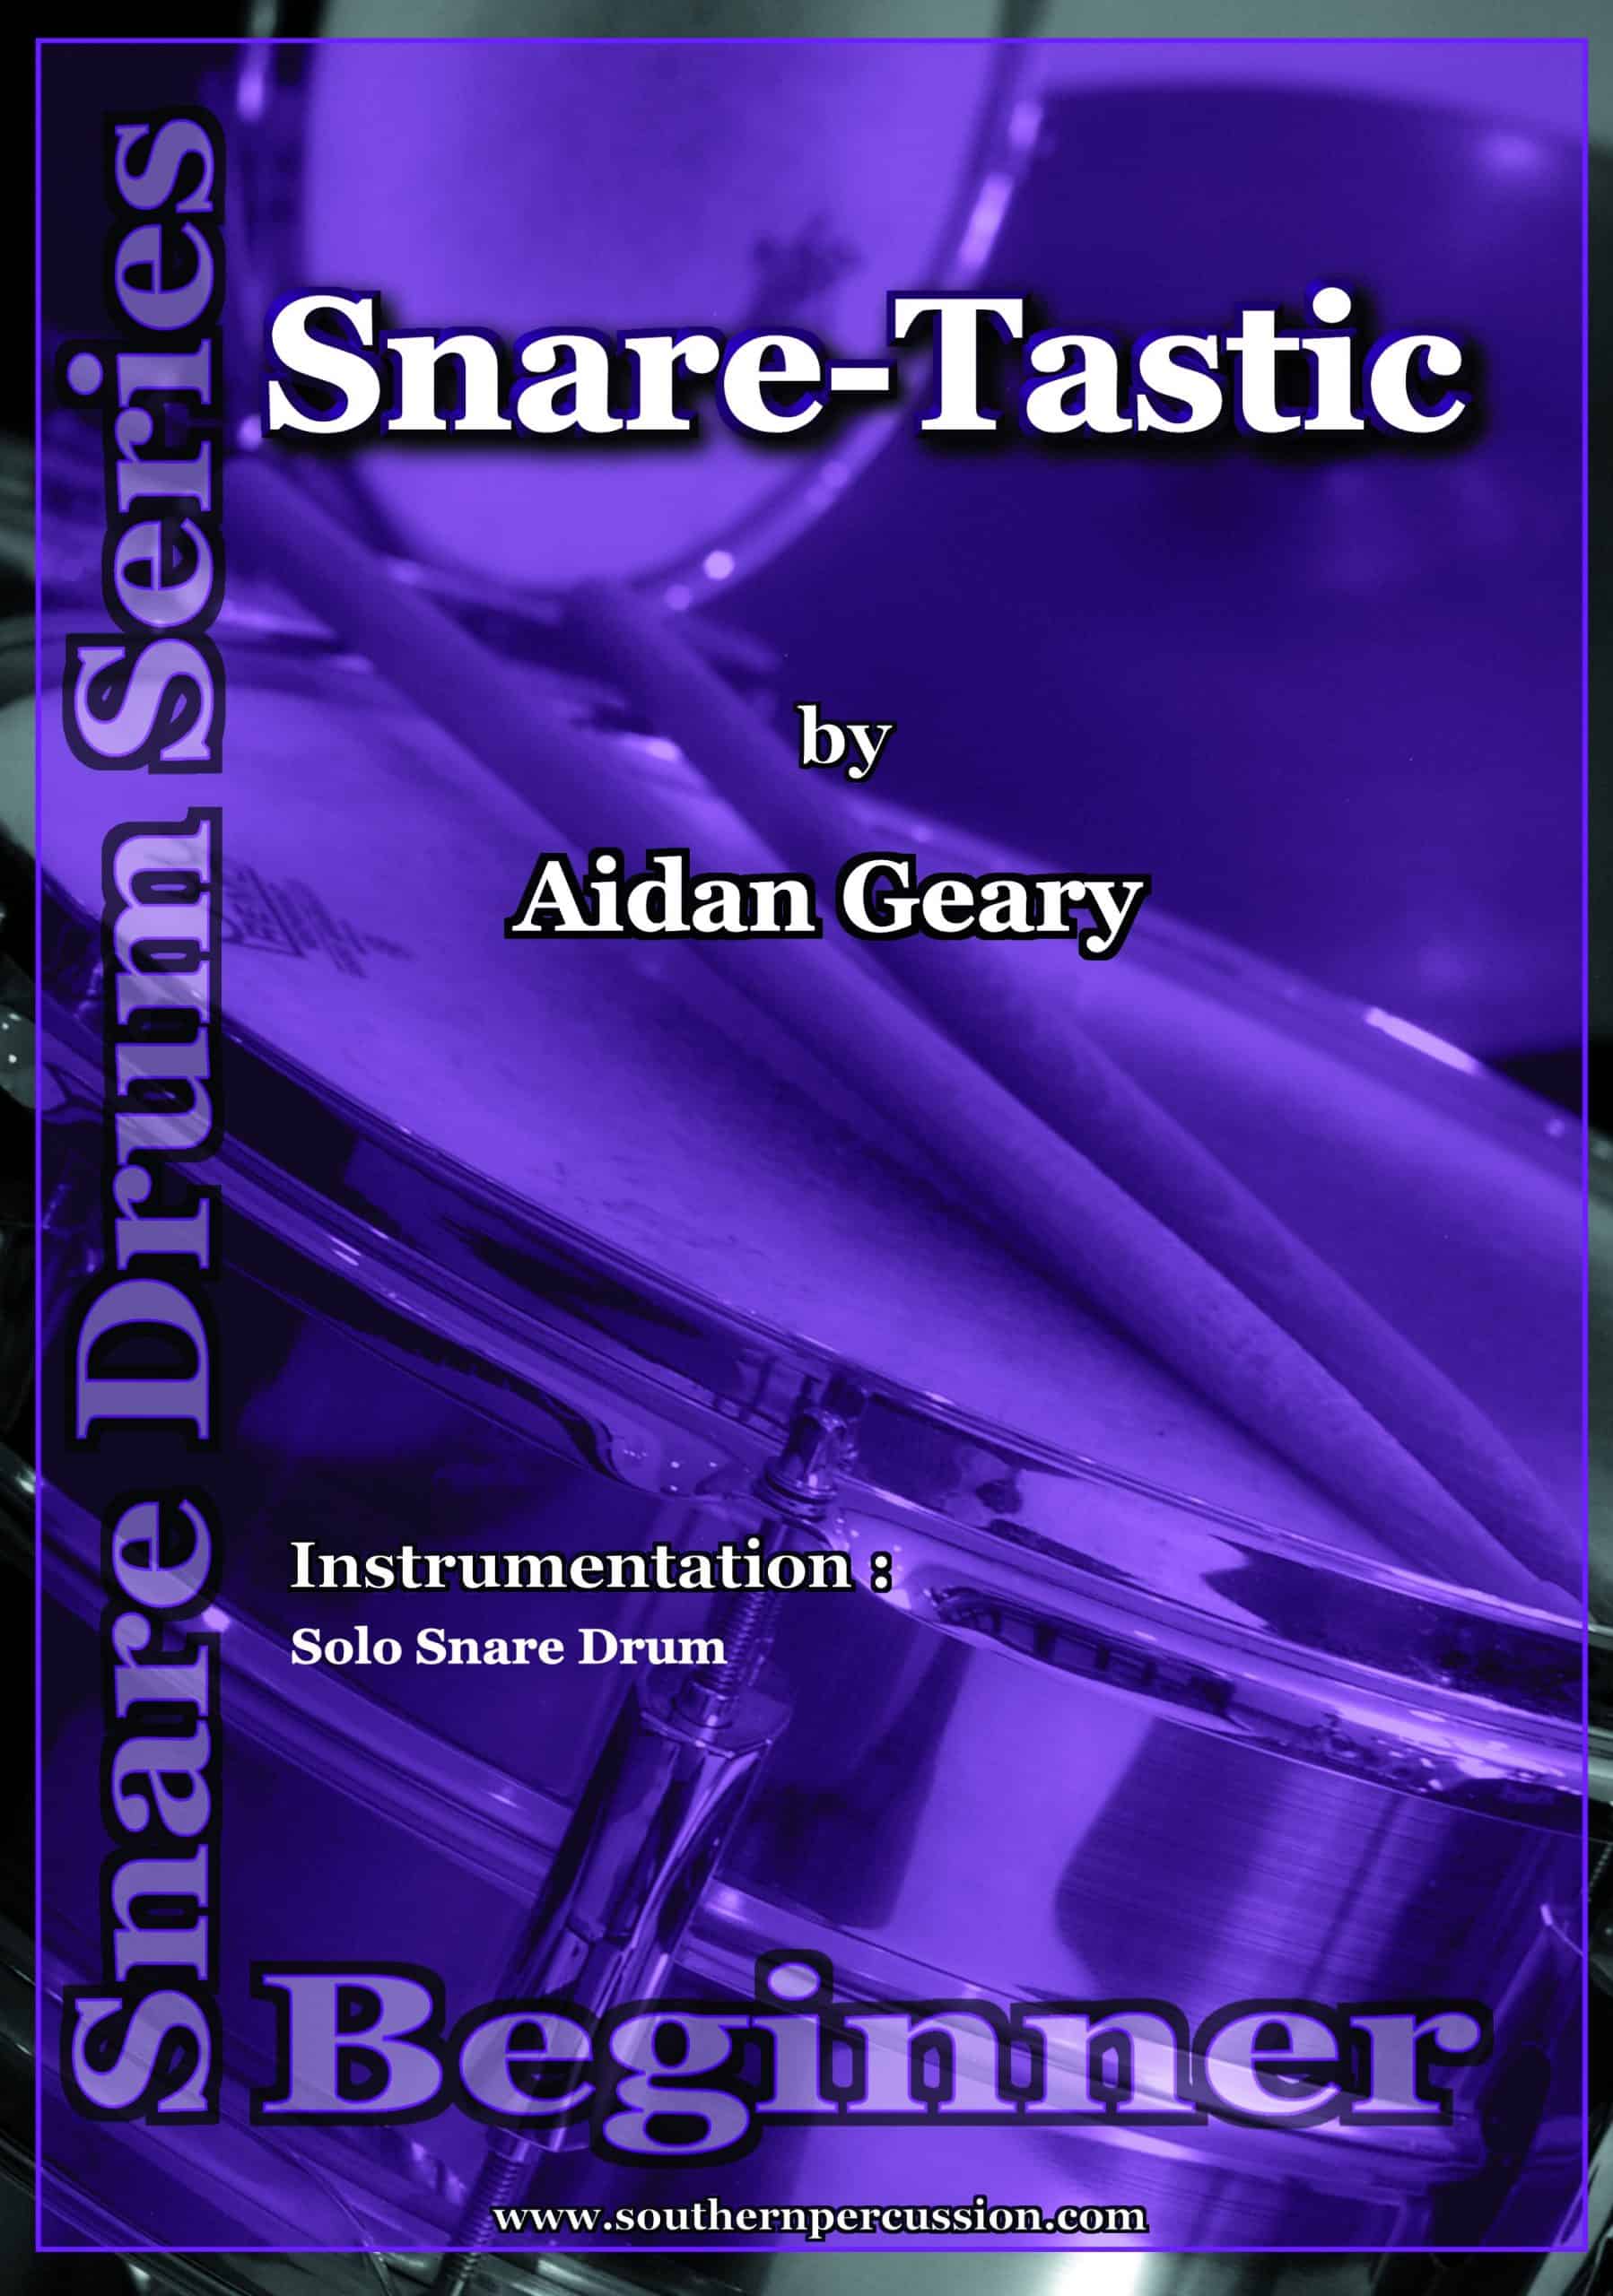 Snare-Tastic by Aidan Geary